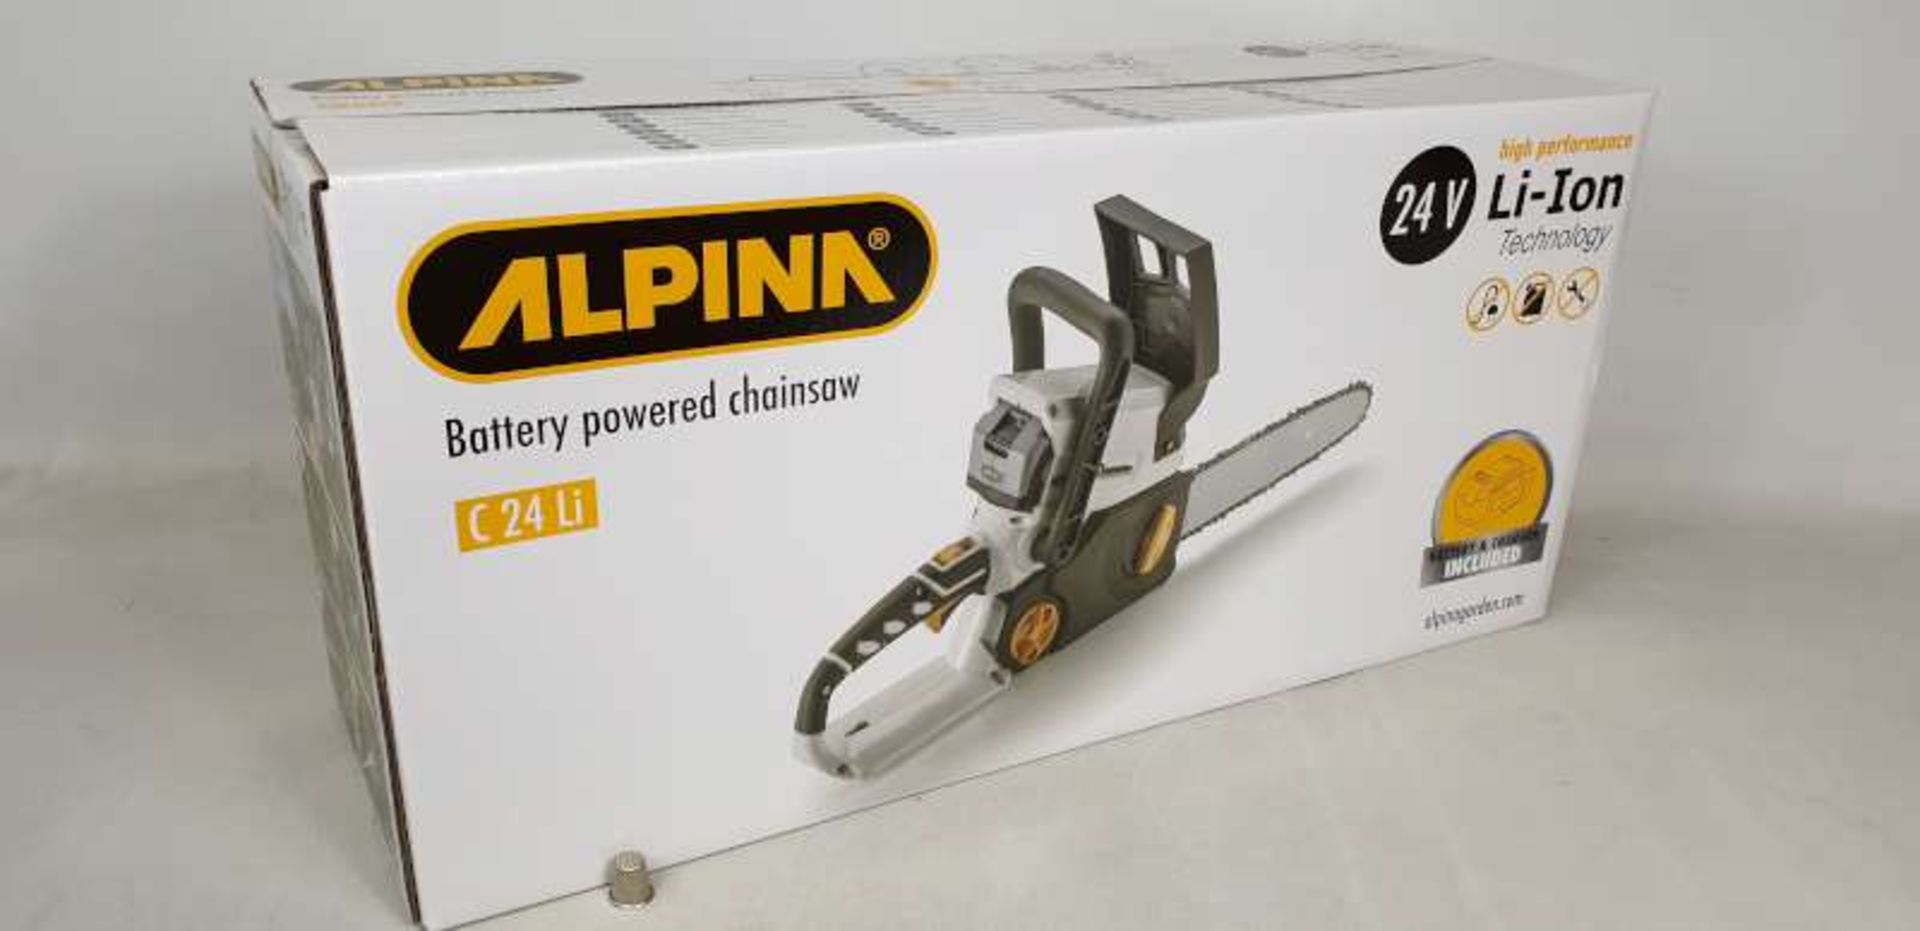 BRAND NEW BOXED ALPINA 24 VOLT LI - ION HIGH PERFORMANCE TECHNOLOGY BATTERY POWERED CHAINSAW,